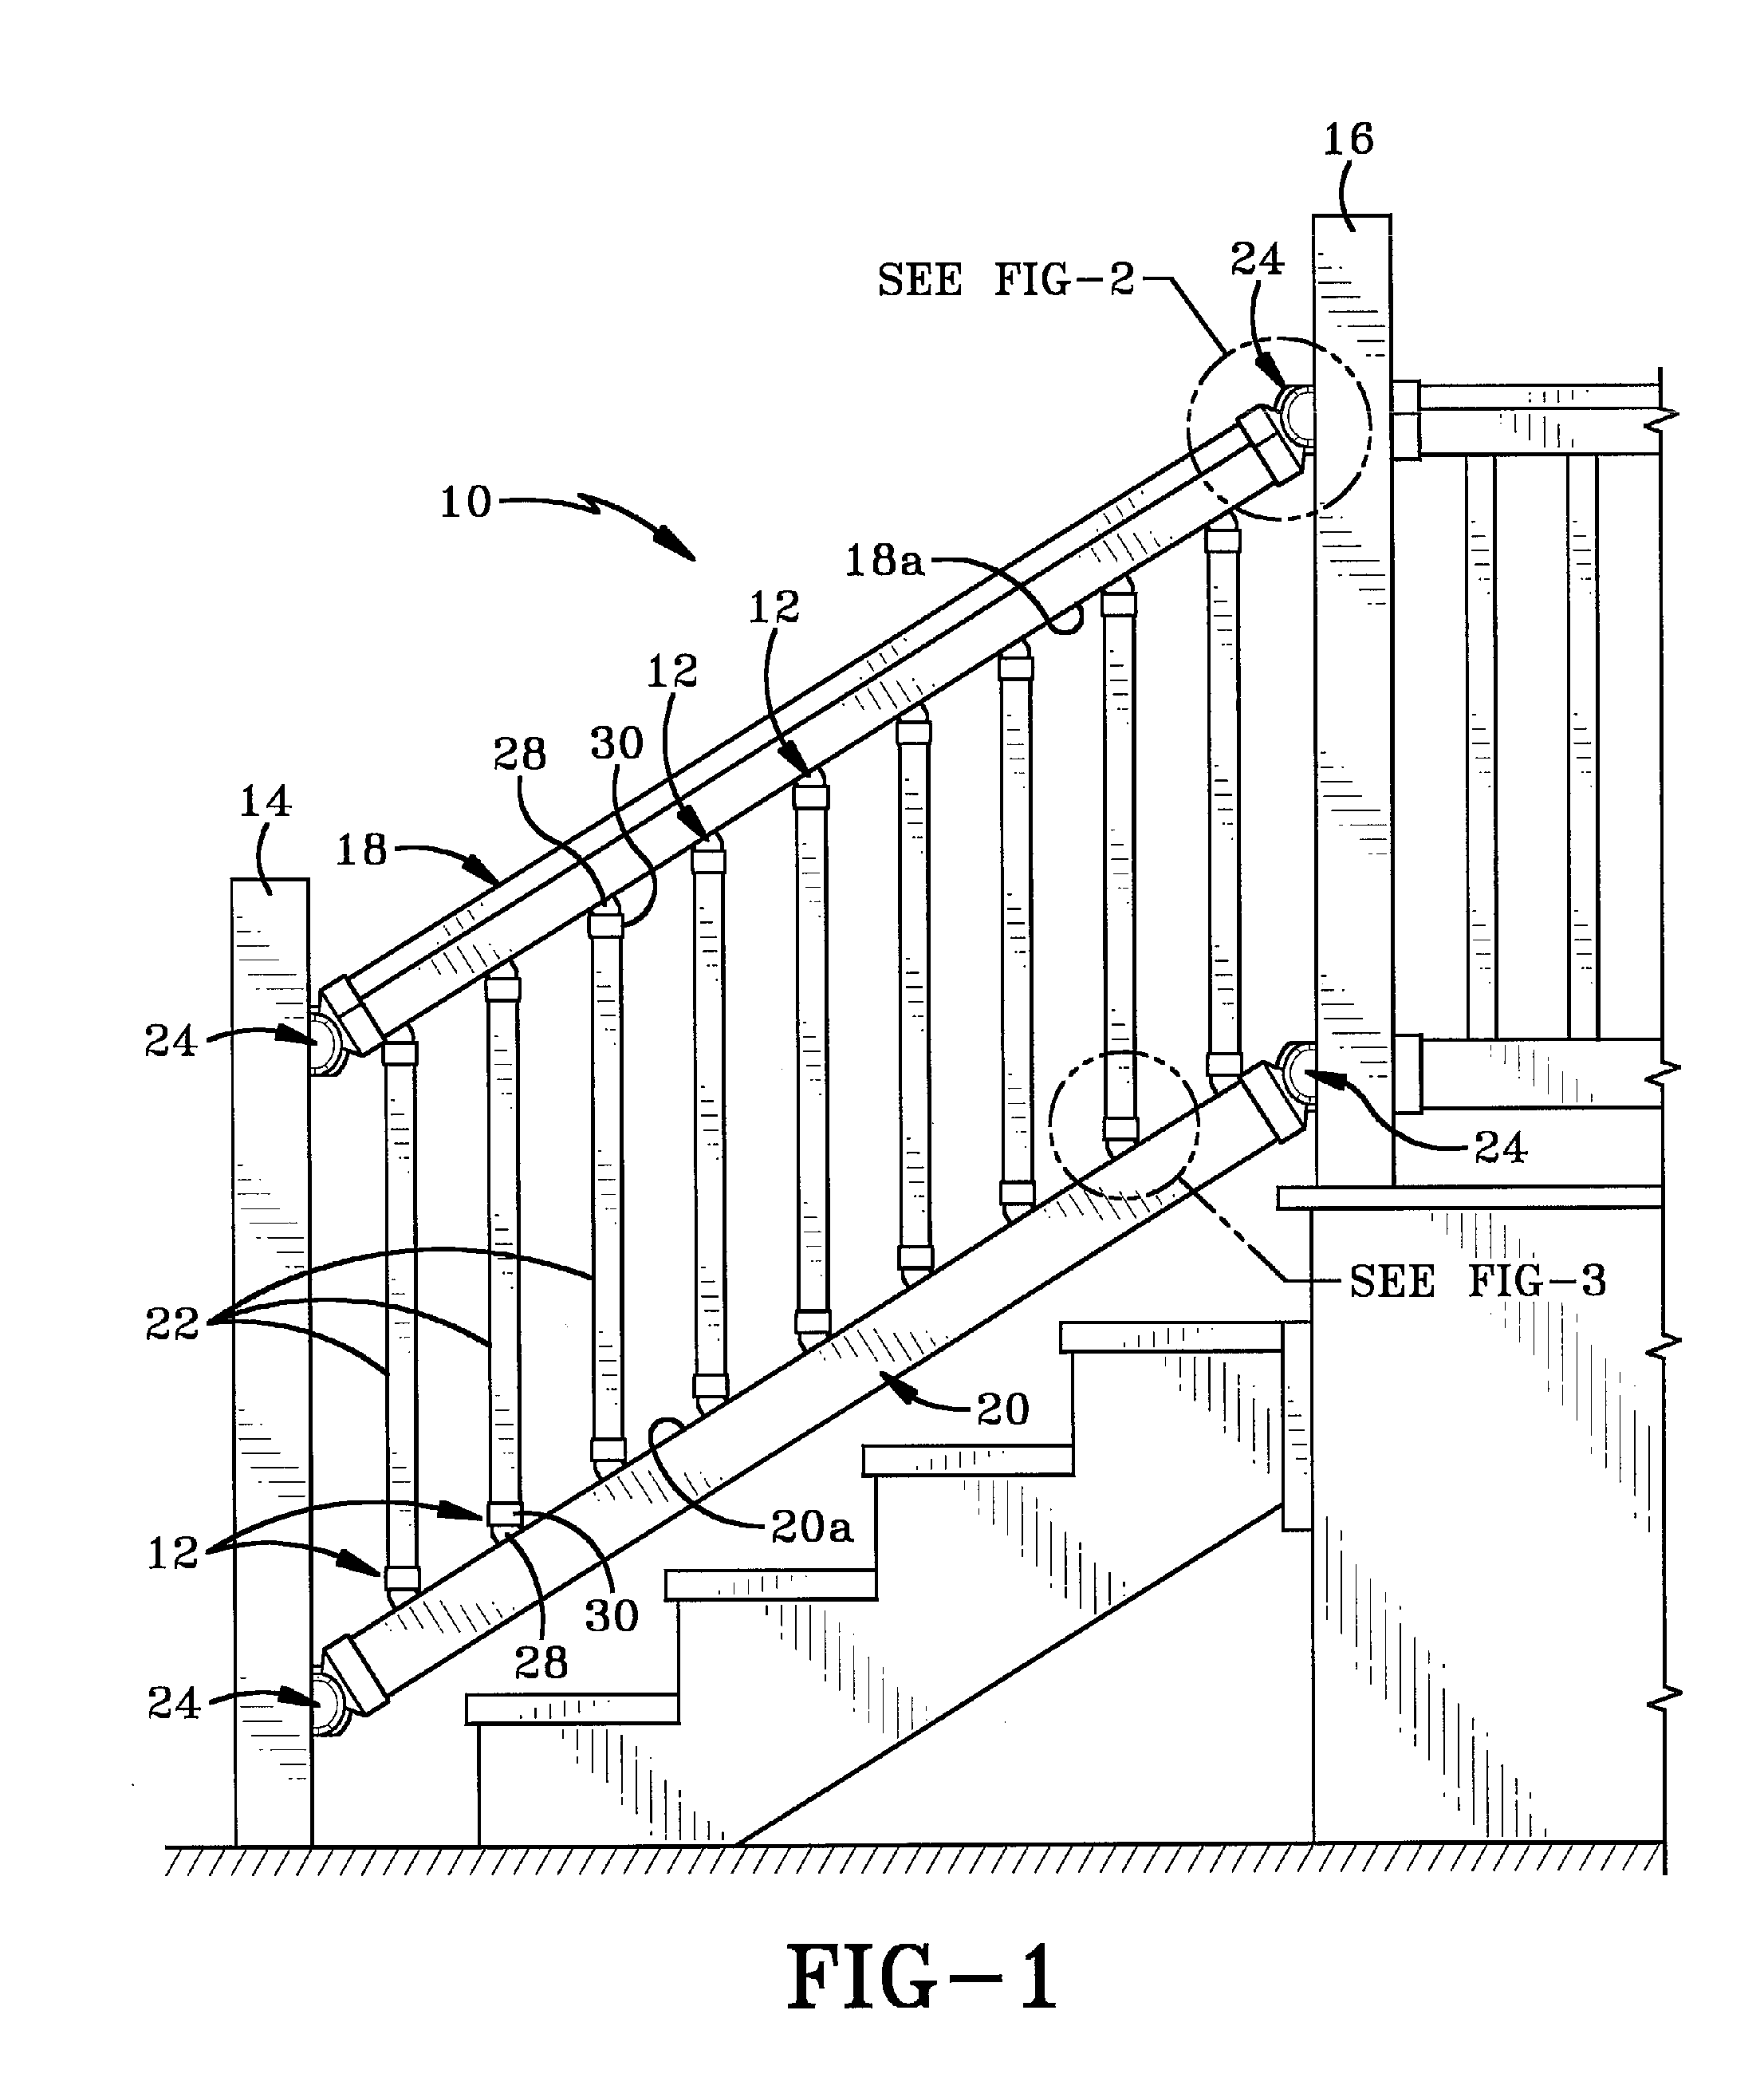 Method and apparatus for attaching spindles to rails in a fence assembly